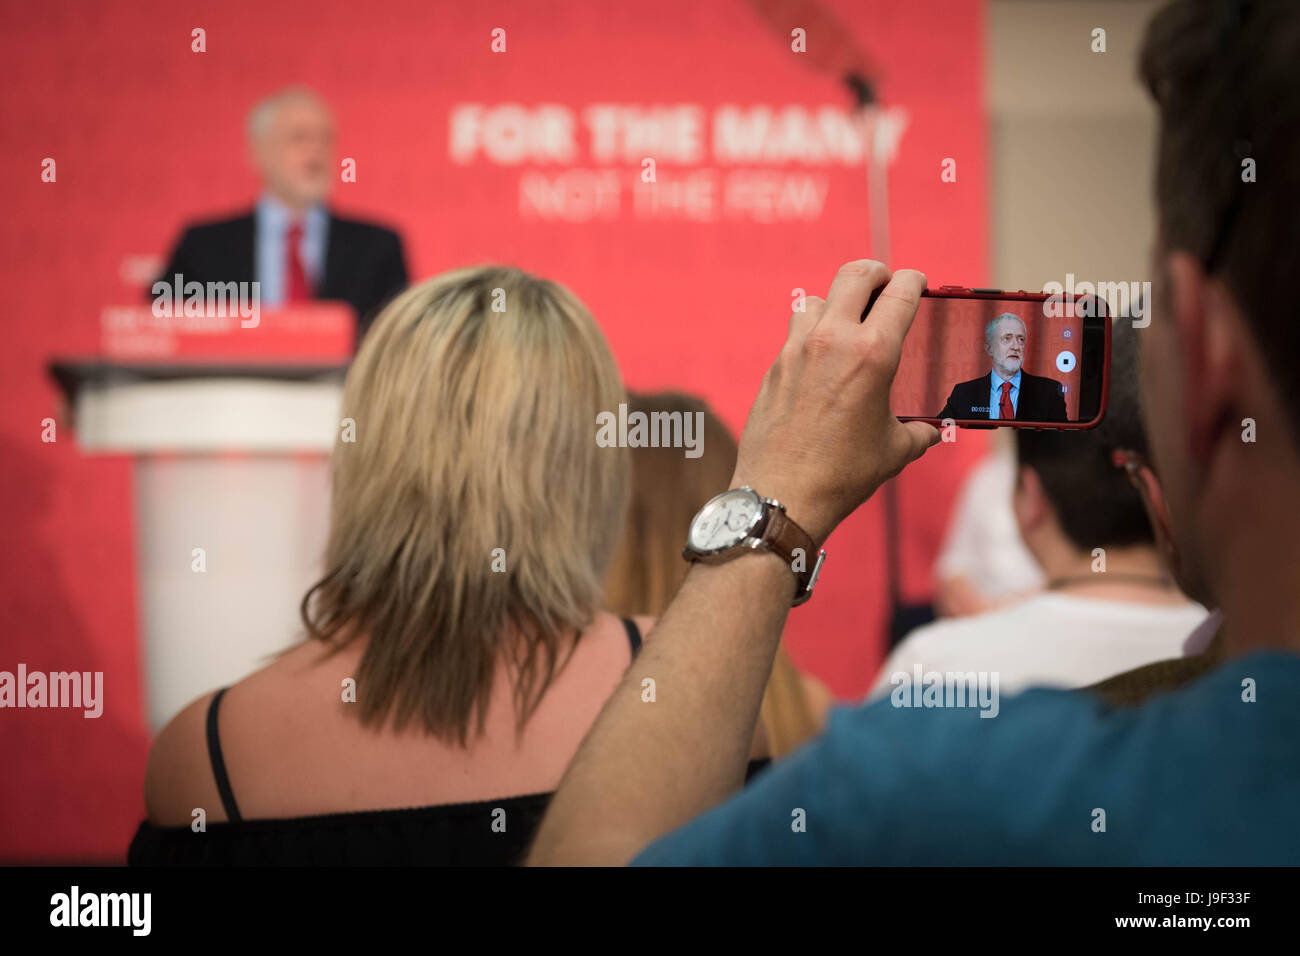 Labour leader Jeremy Corbyn delivers a speech on Brexit at the Pitsea Leisure Centre while on the General Election campaign trail in Basildon, Essex. Stock Photo